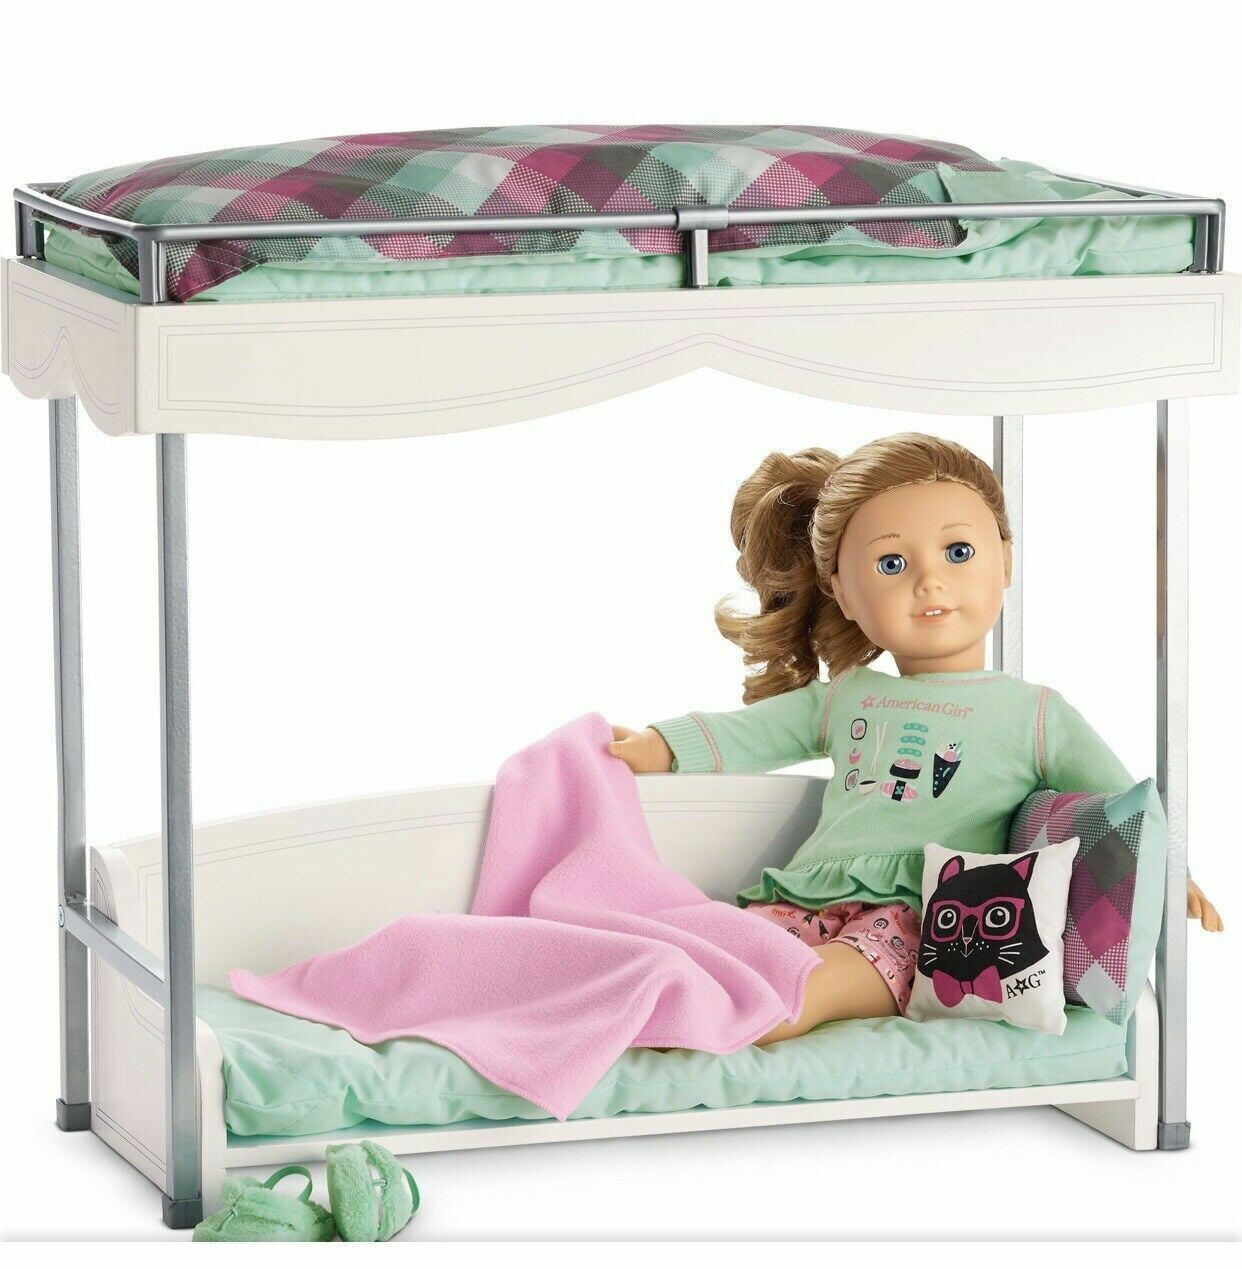 American Girl Truly Me Bunk Bed And Bedding For 18 Inch Dolls Doll Not Included